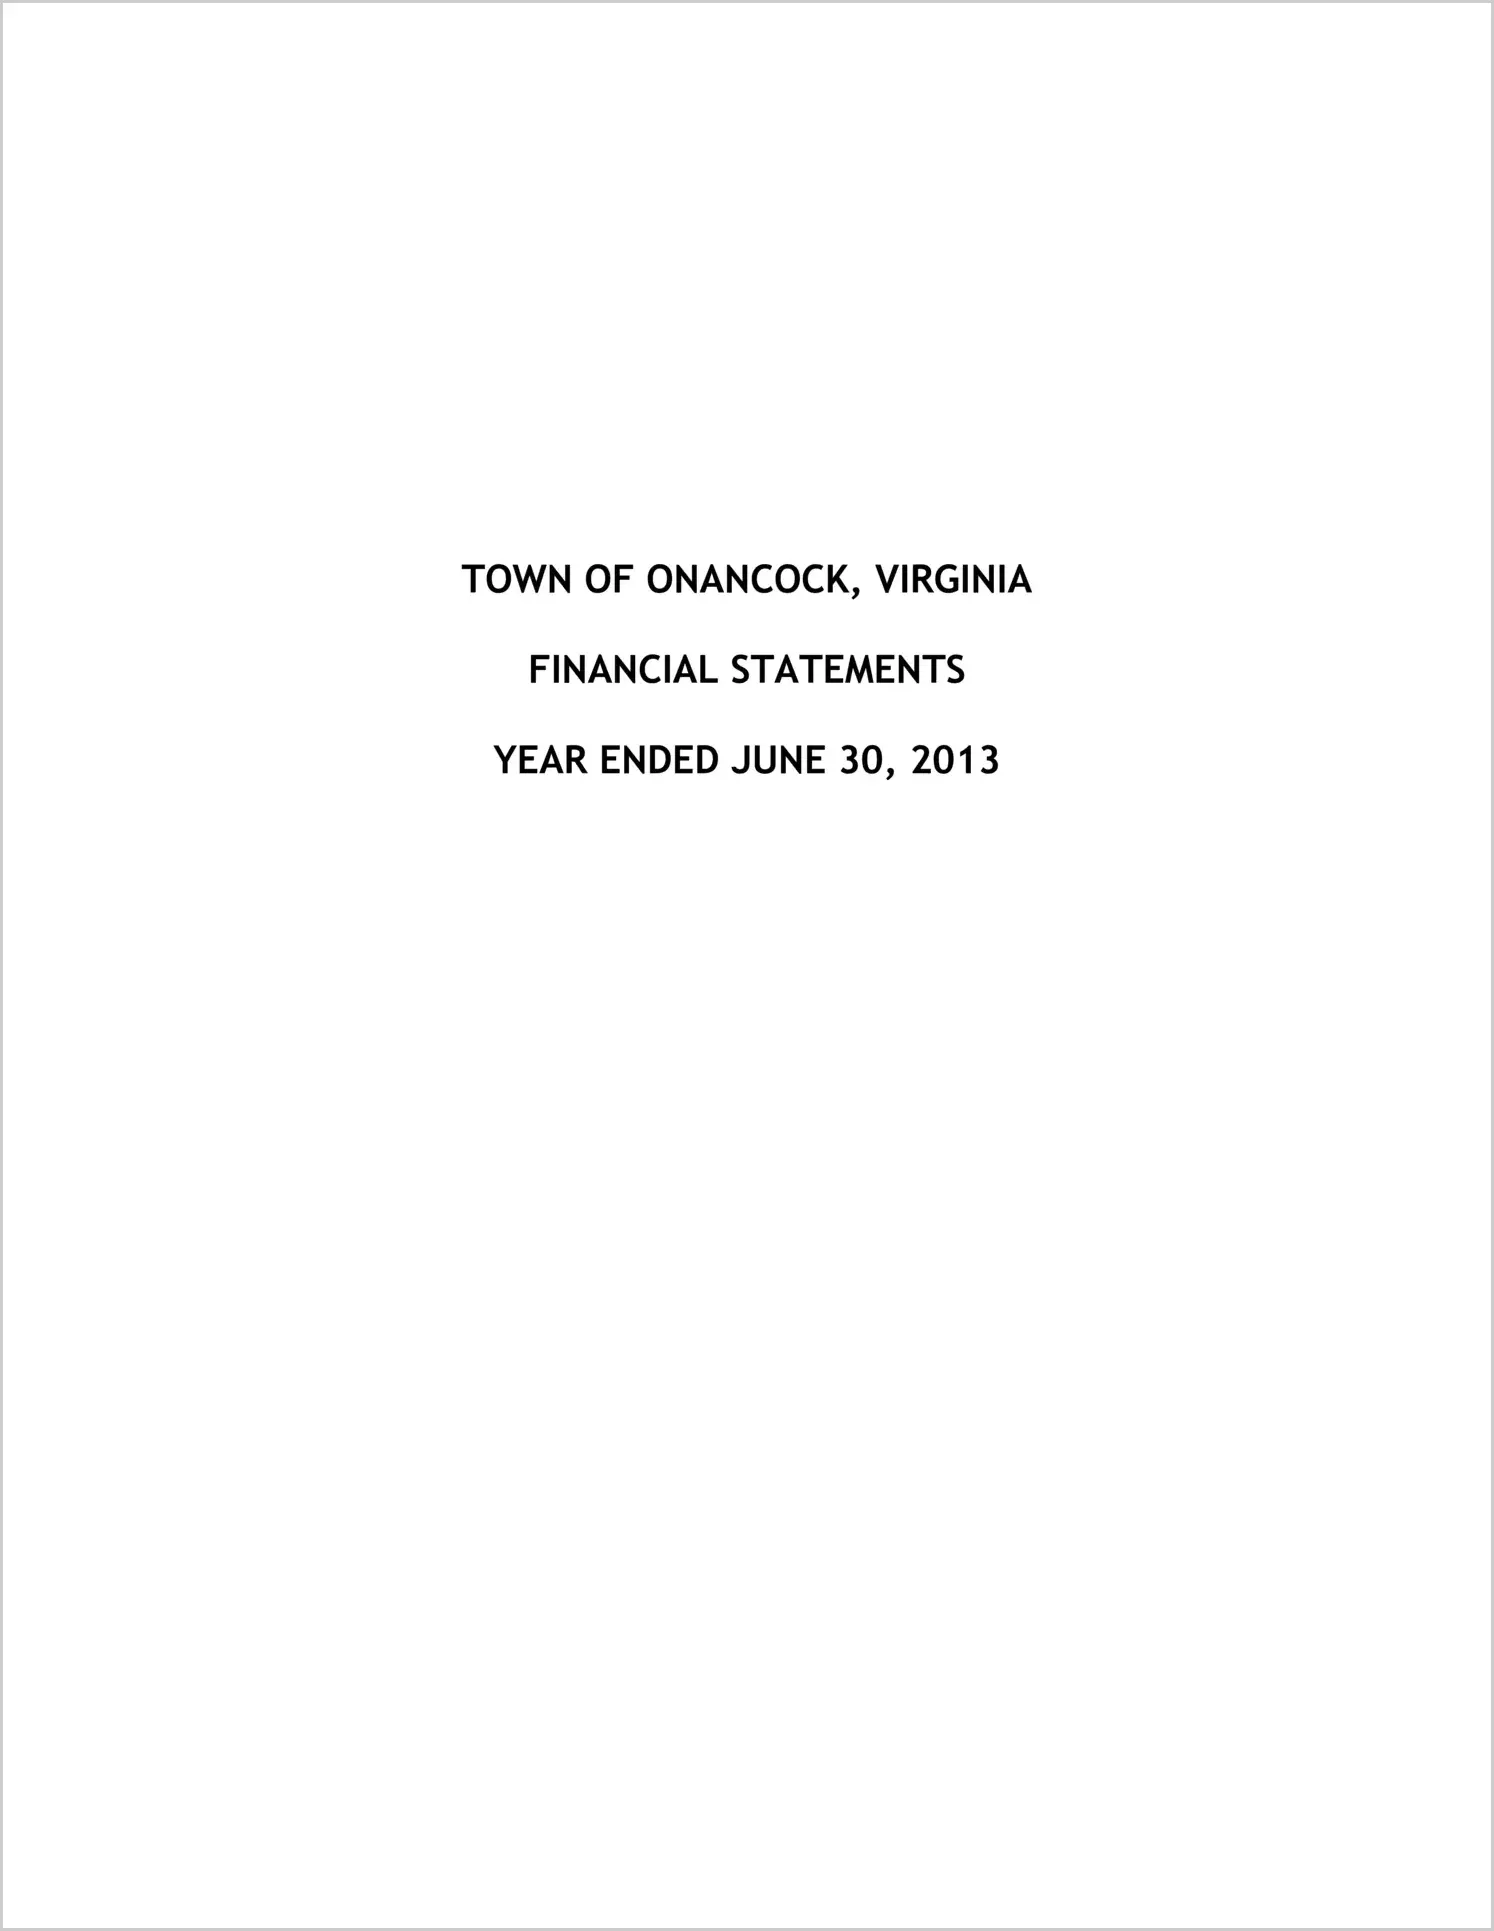 2013 Annual Financial Report for Town of Onancock